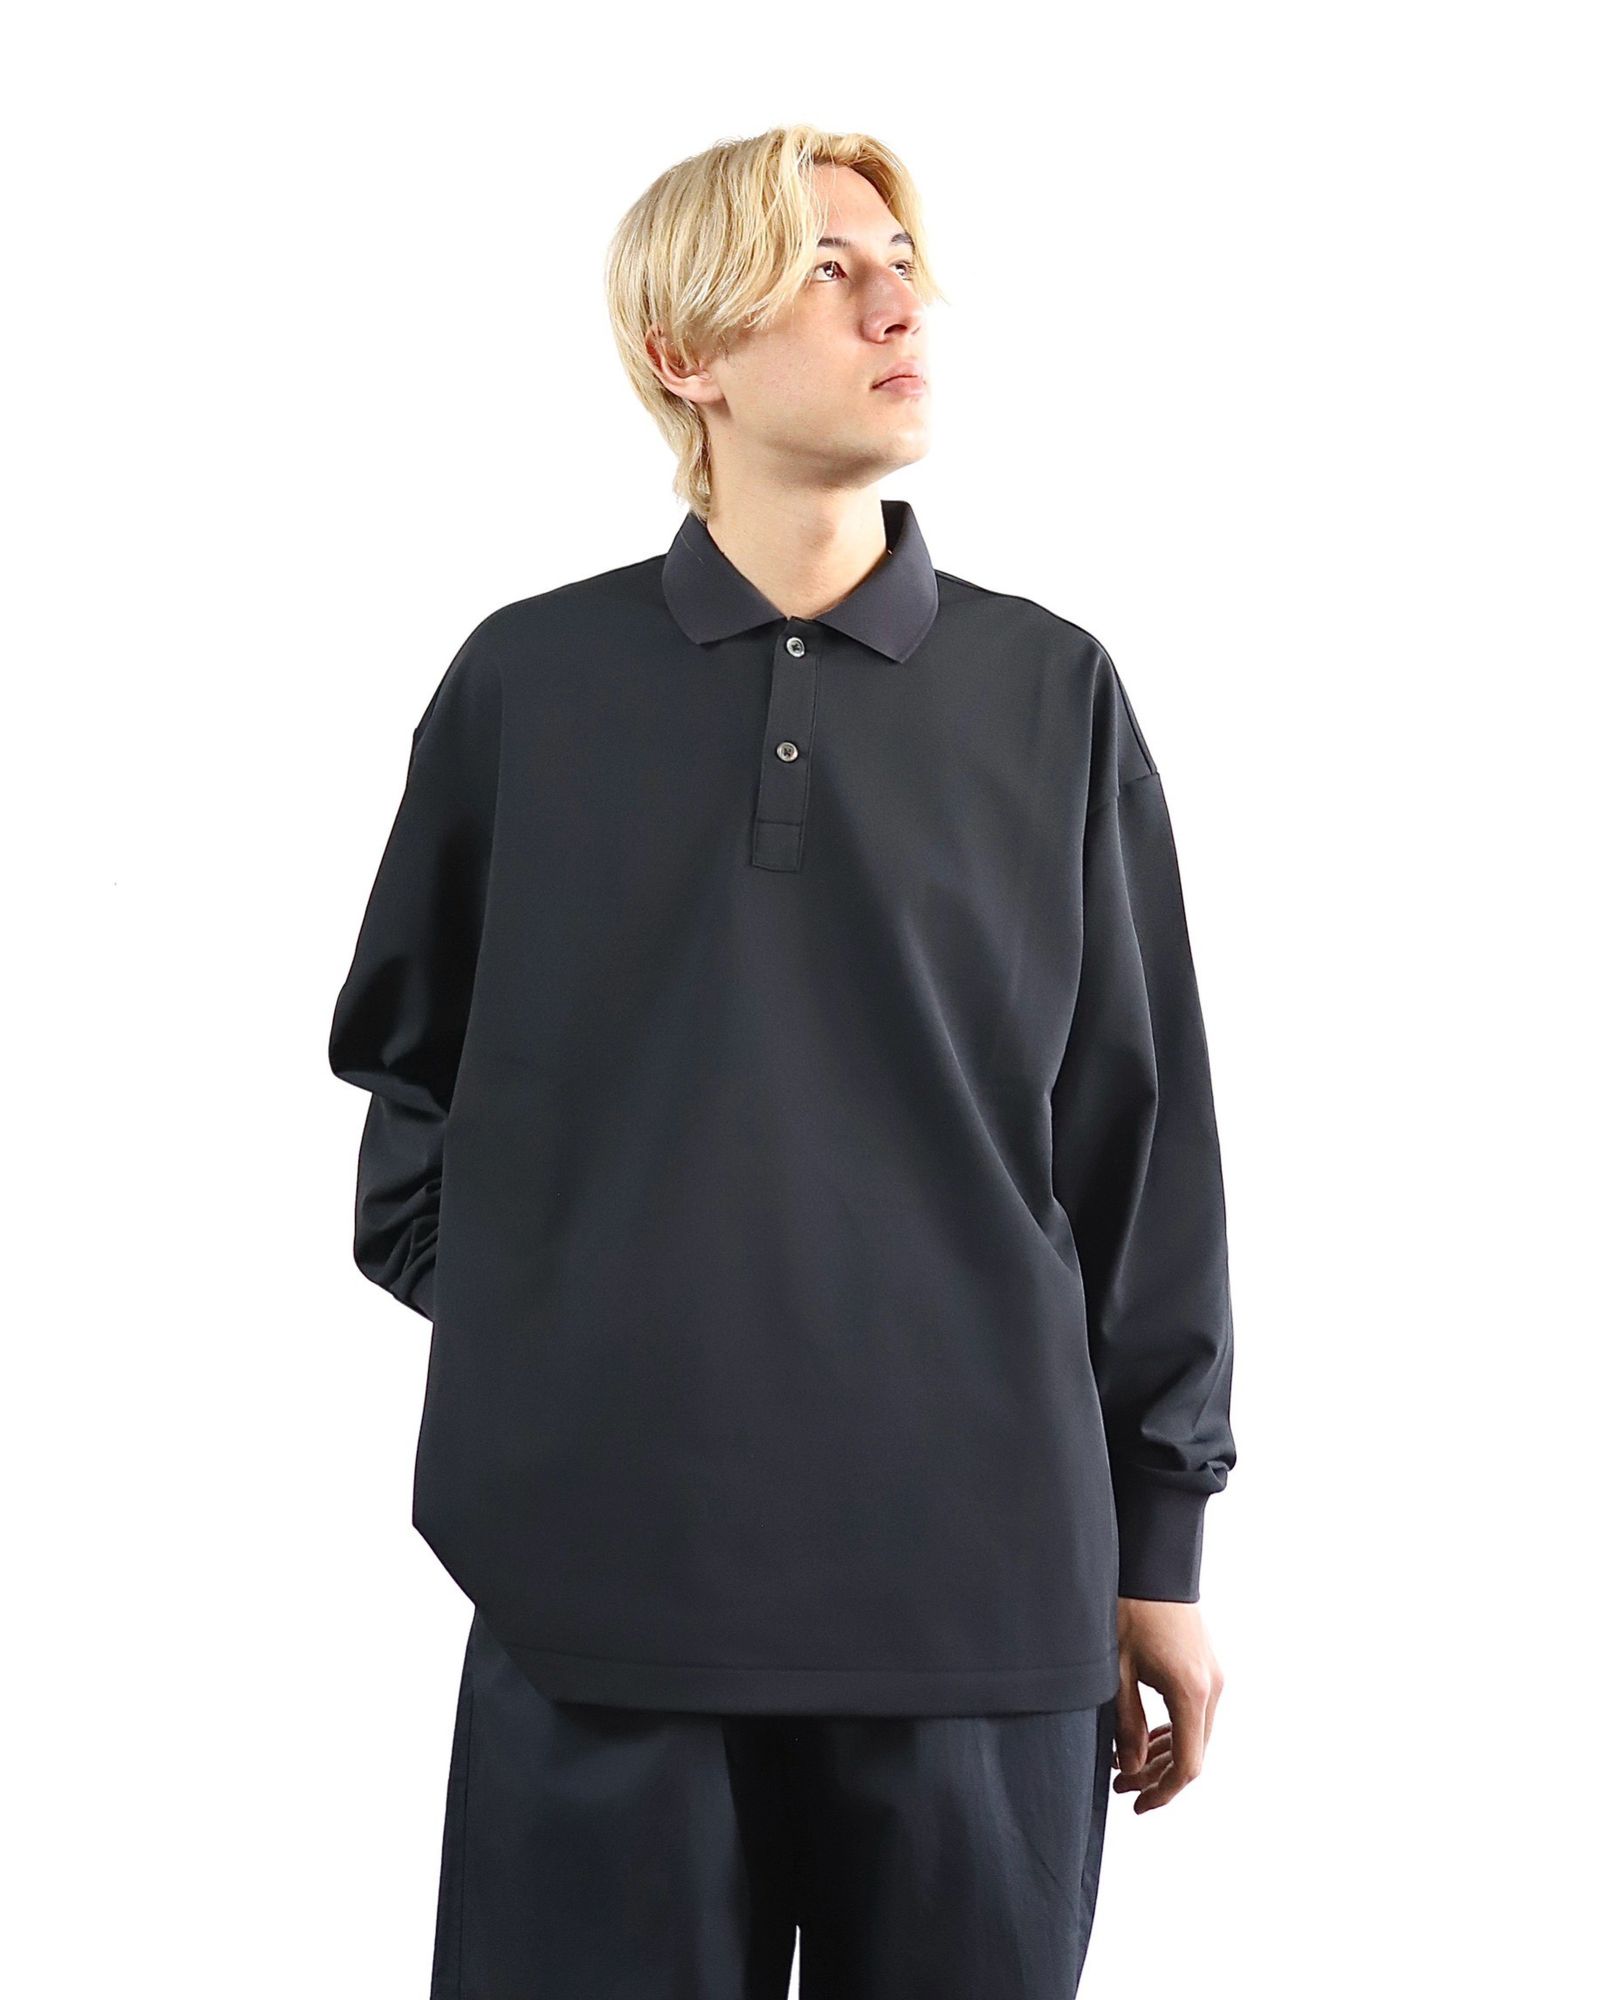 FreshService 24SS 新作DRY PIQUE JERSEY L/S POLO(BLACK) style 